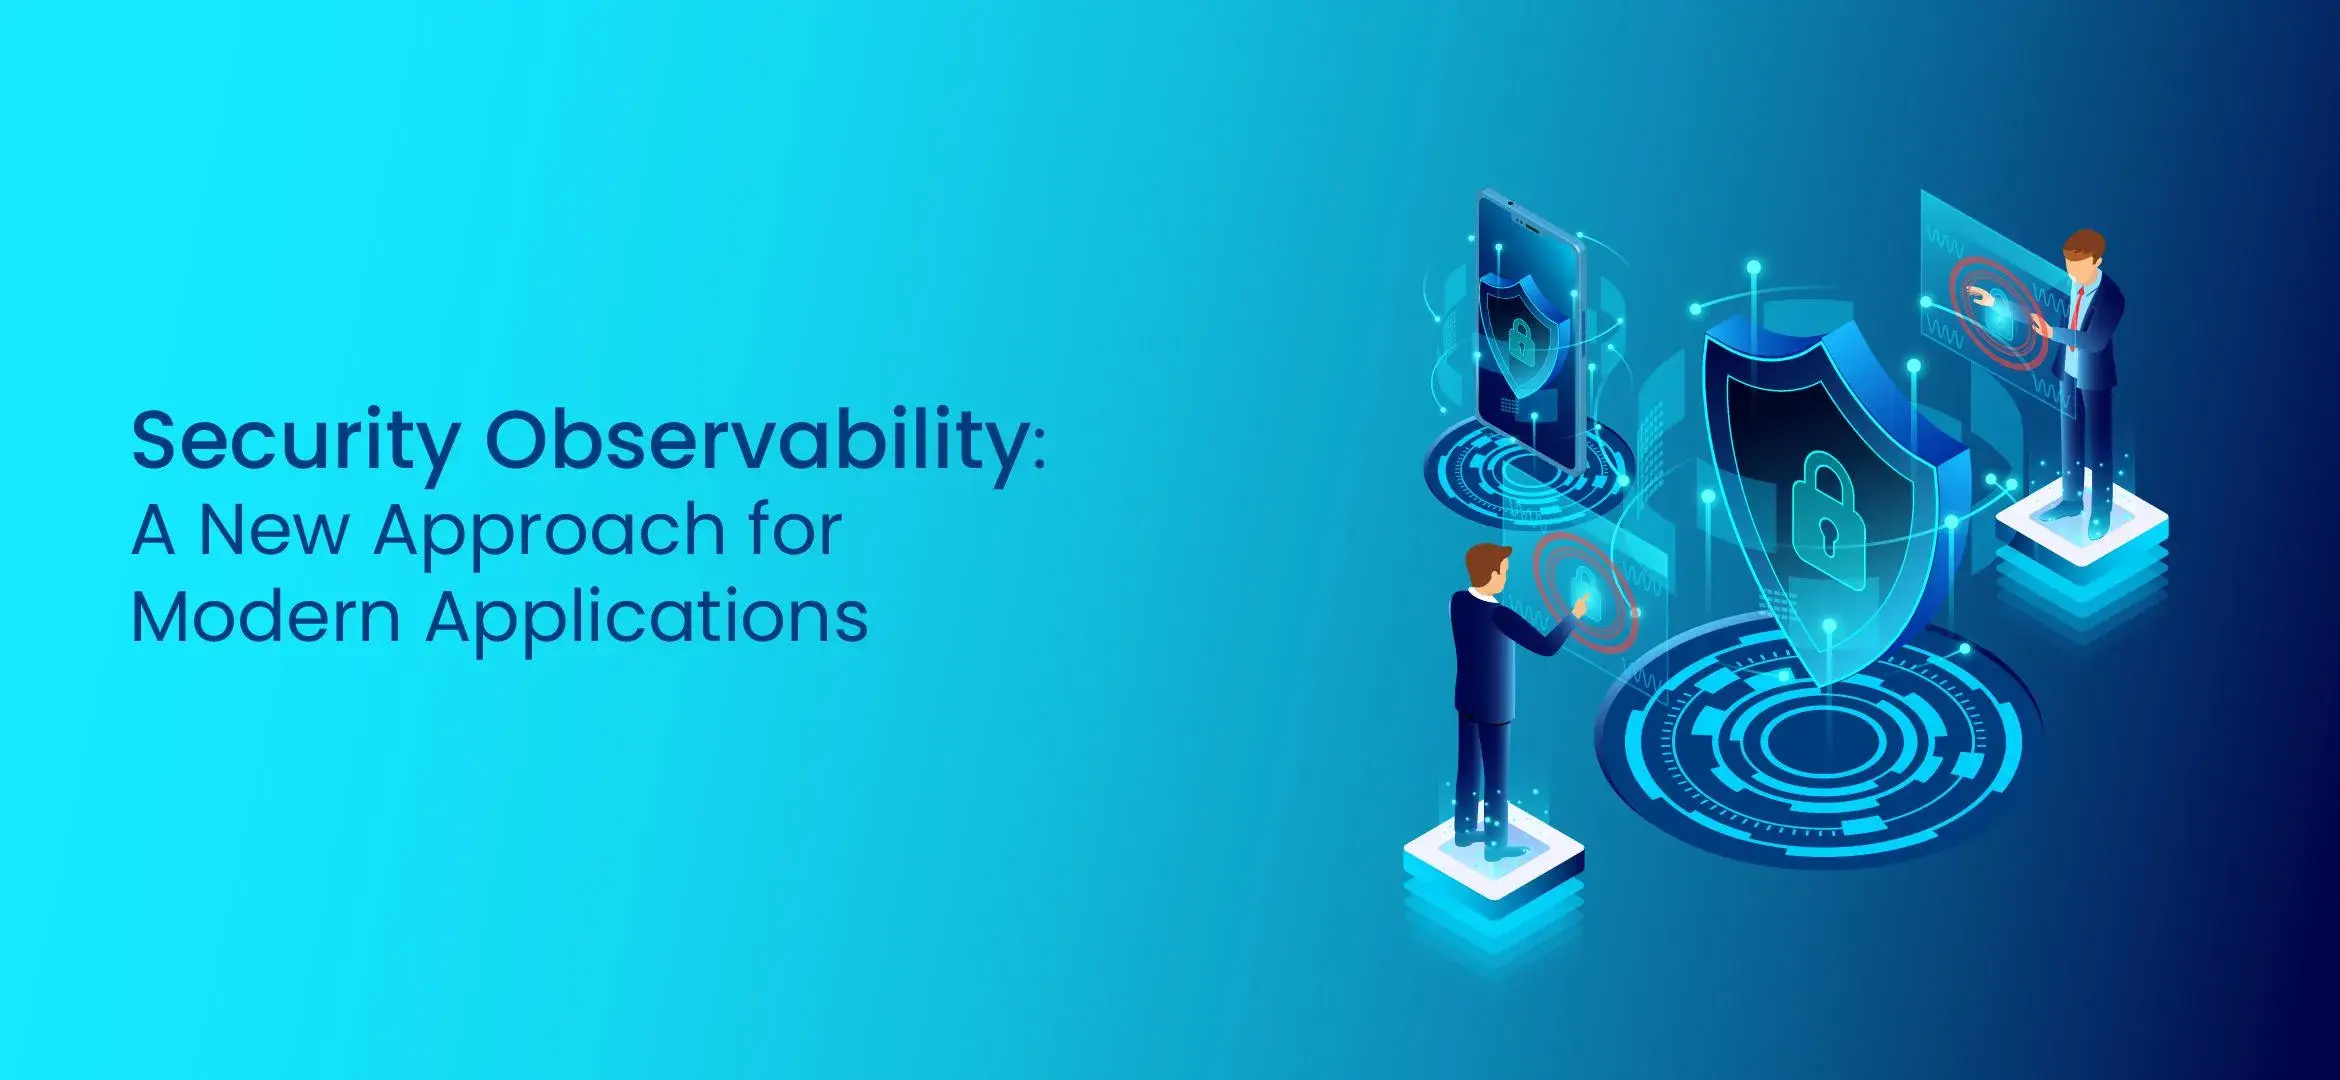 1712233866Security Observability A New Approach for Modern Applications.webp